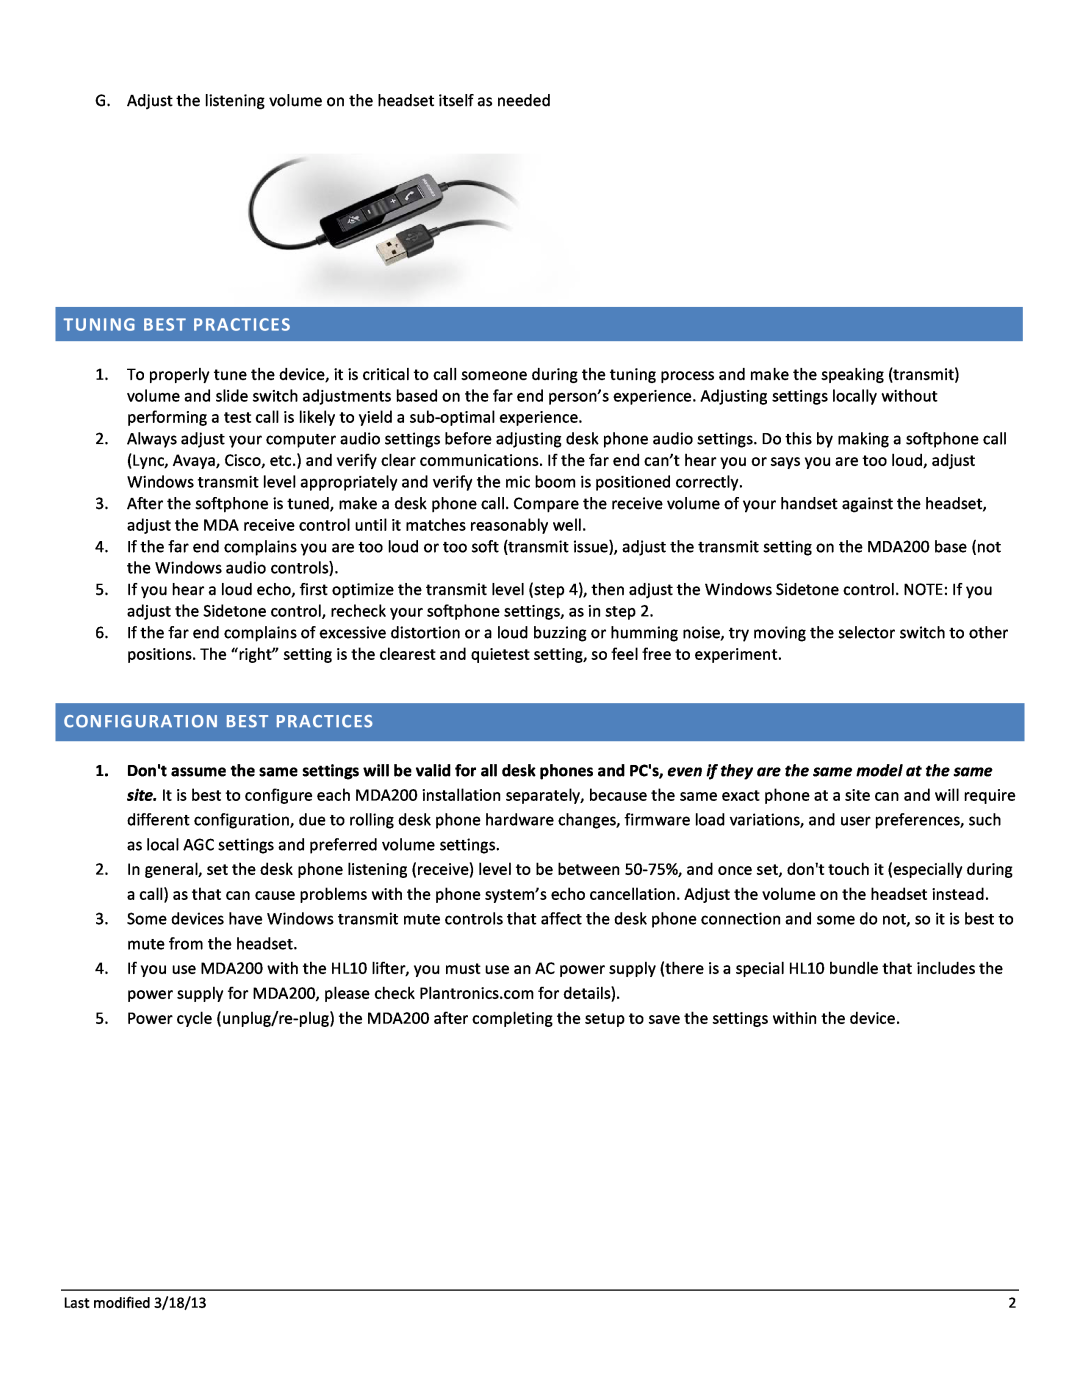 Plantronics mda200 manual Tuning Best Practices, Configuration Best Practices, Last modified 3/18/13 